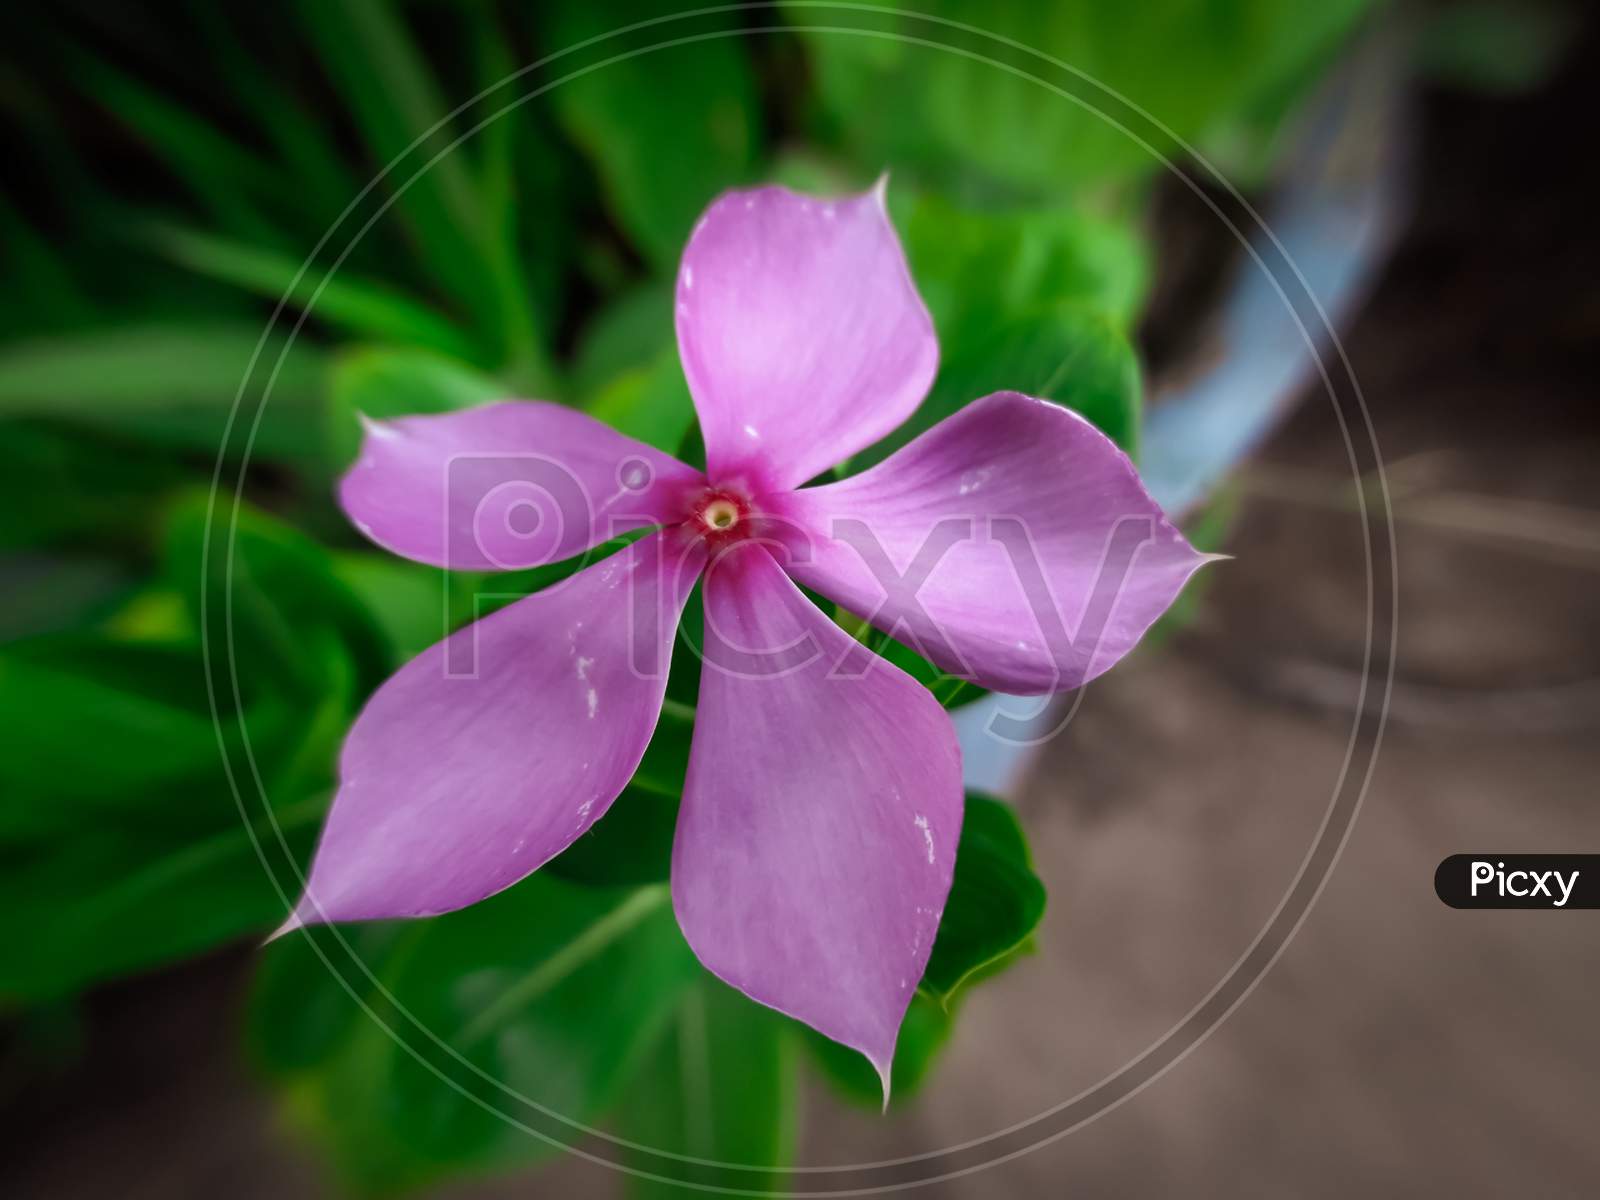 Pink Flower With Green Leaves And Dusty Floor